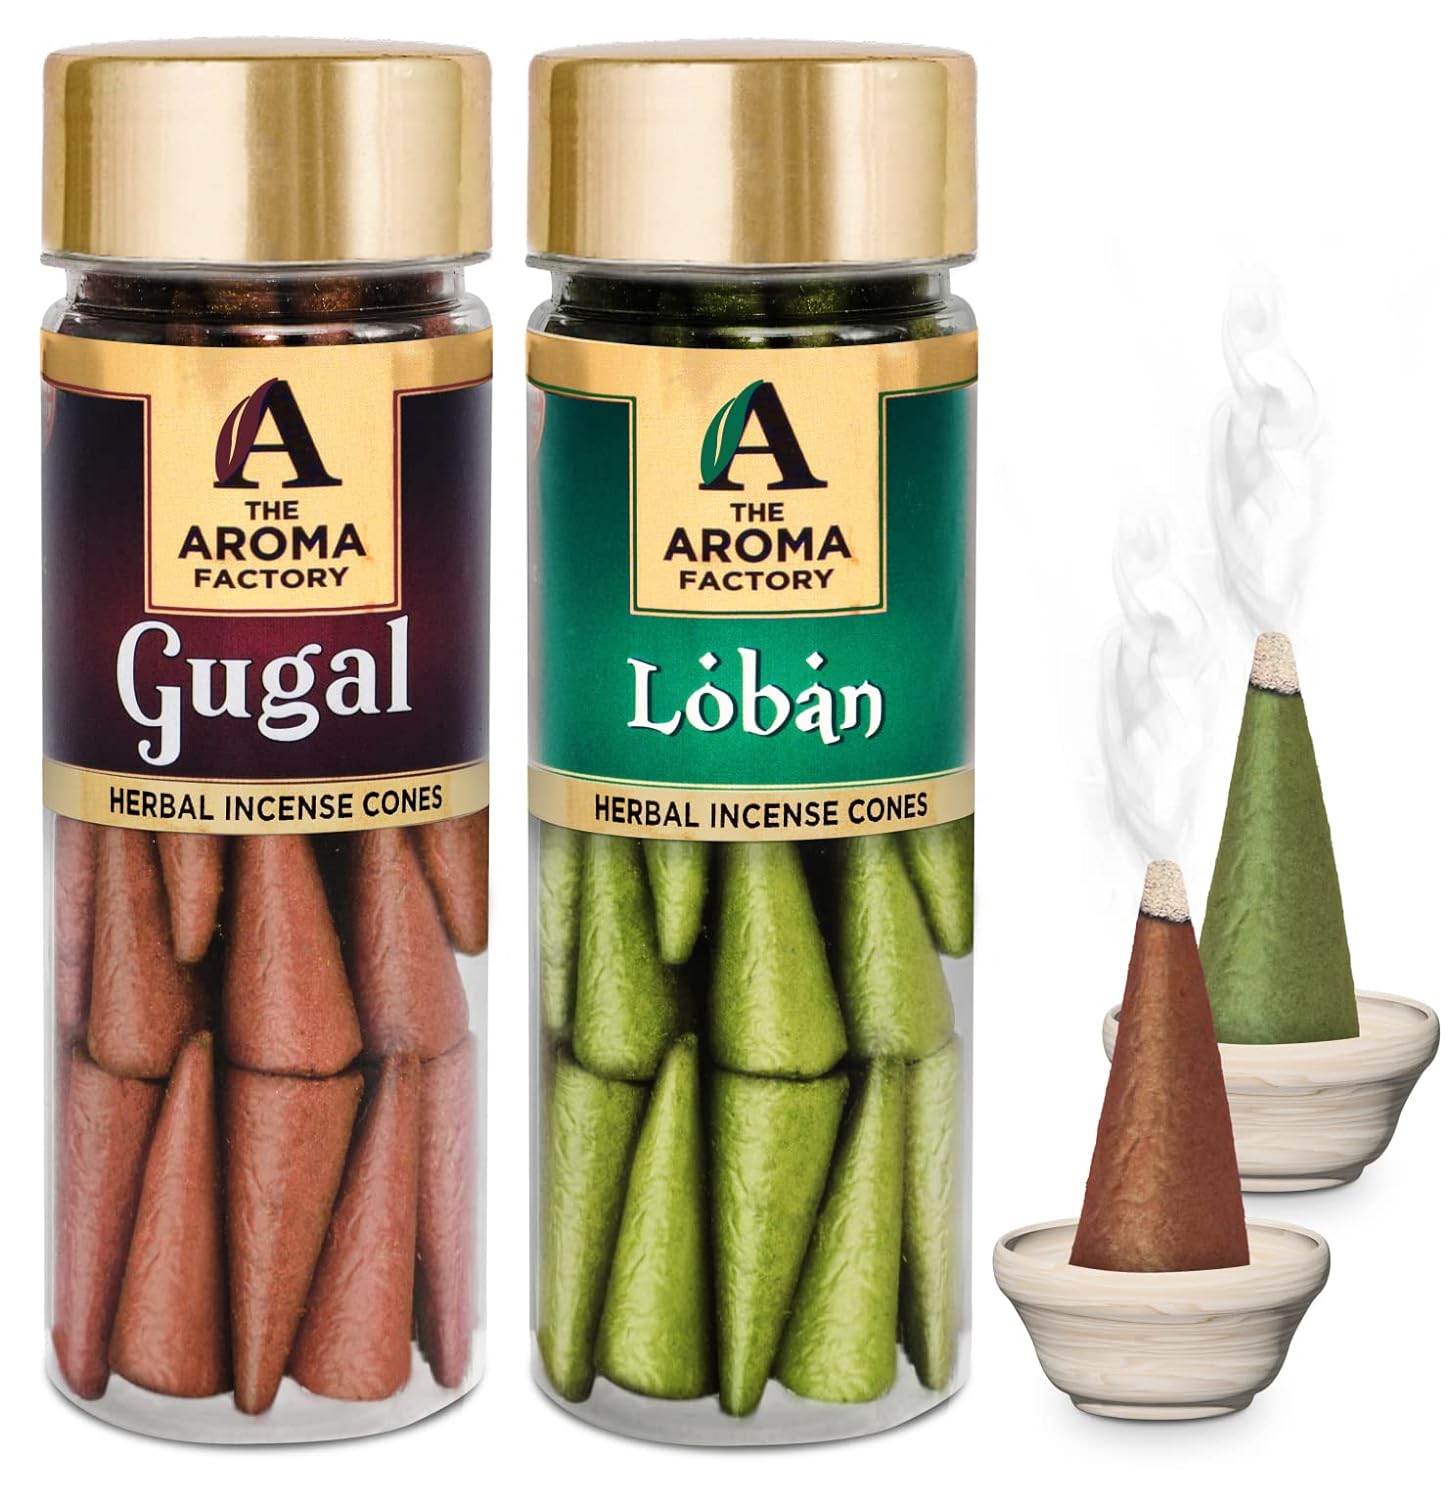 The Aroma Factory Incense Dhoop Cone for Pooja, Gugal & Loban (100% Herbal & 0% Charcoal) 2 Bottles x 30 Cones